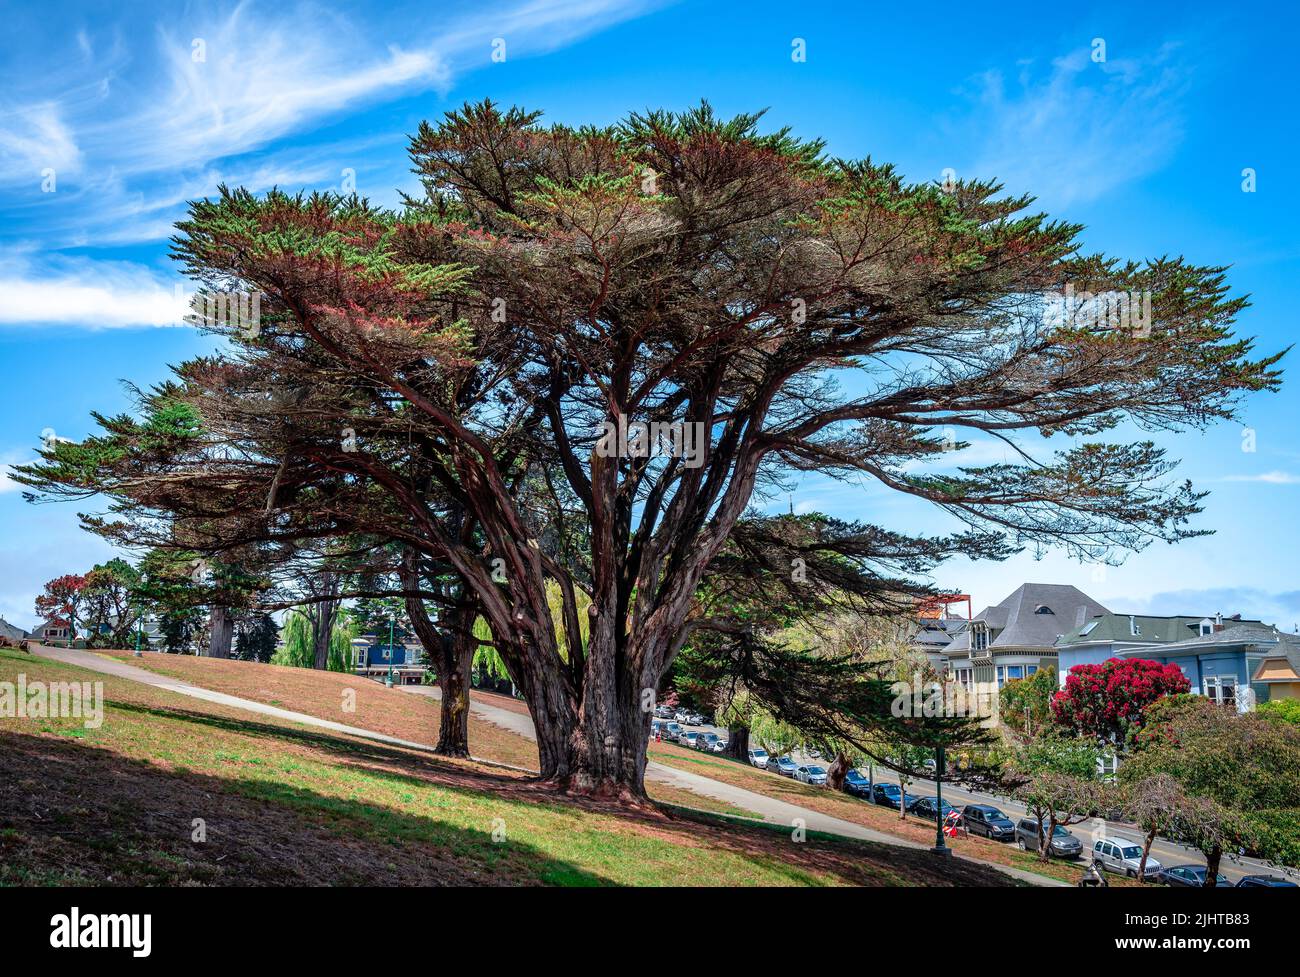 San Francisco, CA, USA - July 17 2015: Monterey Cypresses in Alamo Square Park with Victorian houses in the background. Stock Photo